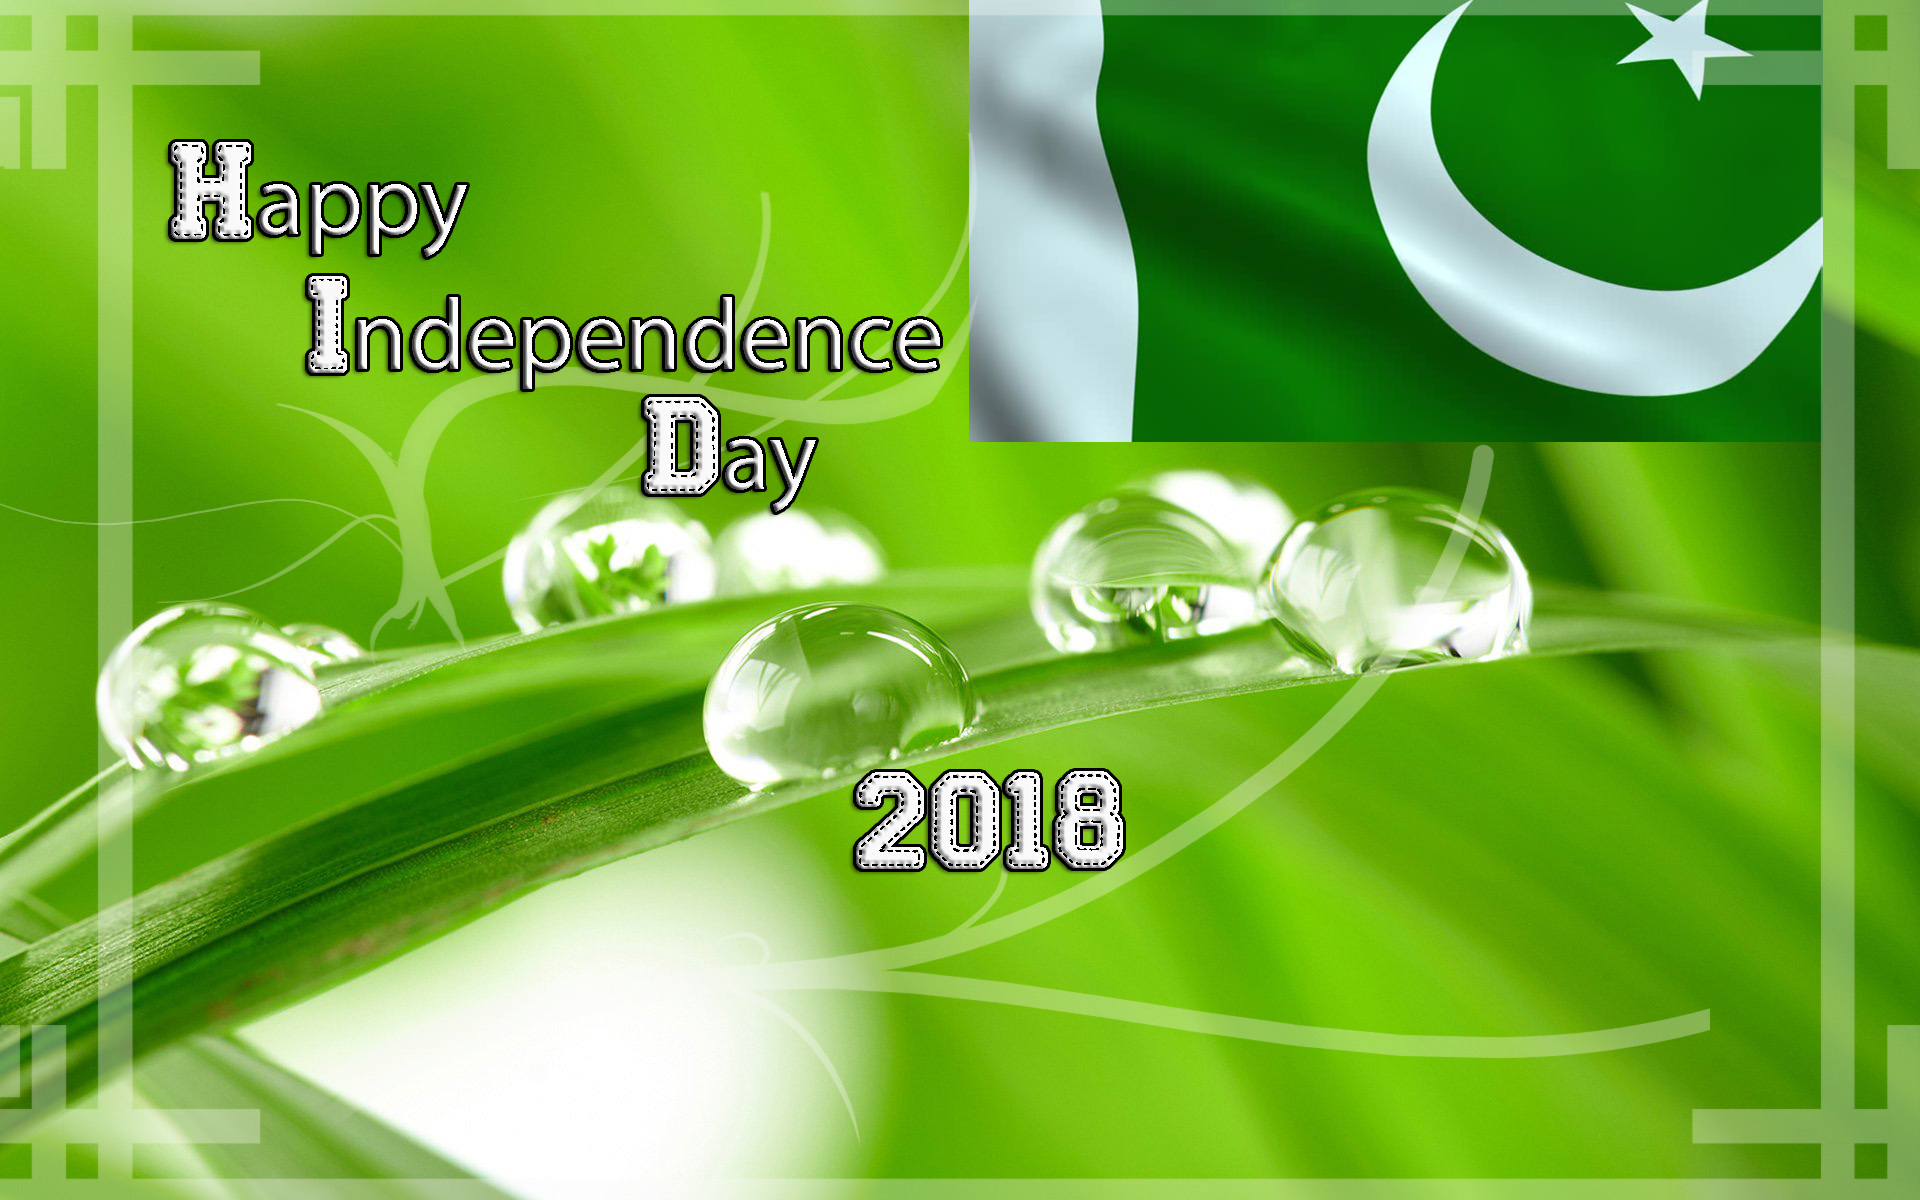 pakistan-independence-day-wallpaper-images-cards-posters